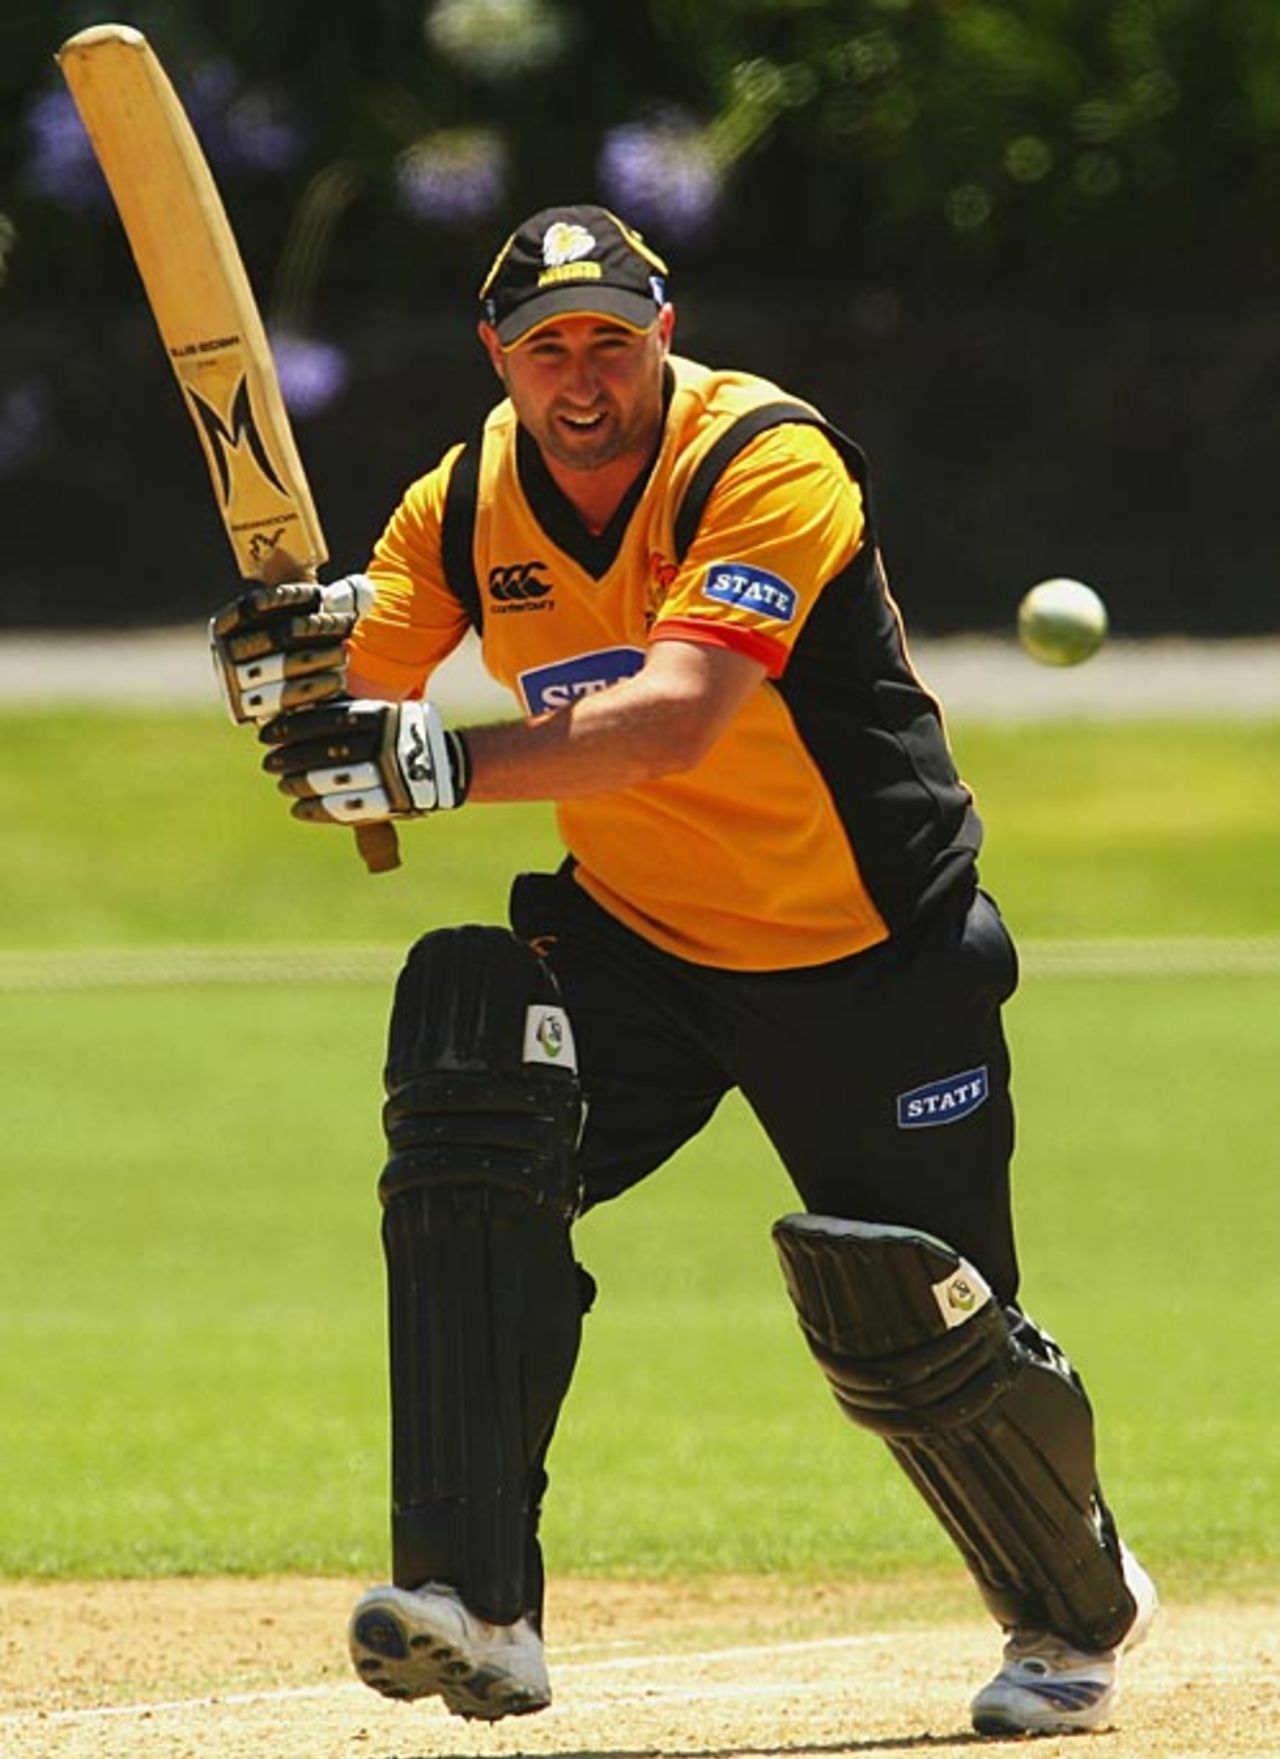 Neal Parlane sets off for a single, Auckland v Wellington, State Shield, Auckland, January 14, 2009